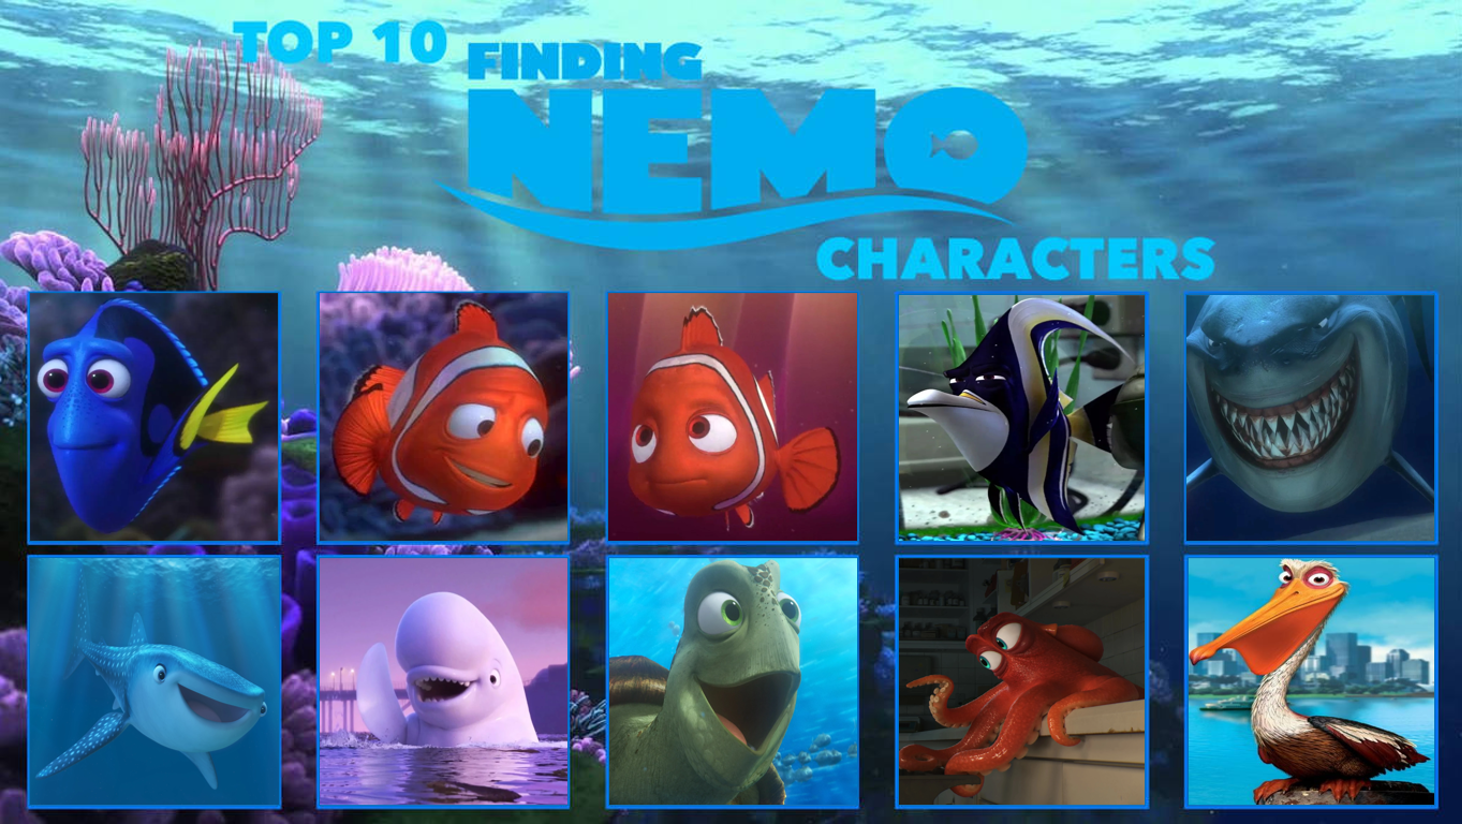 Top 10 Finding Nemo Characters by Media201055 on DeviantArt